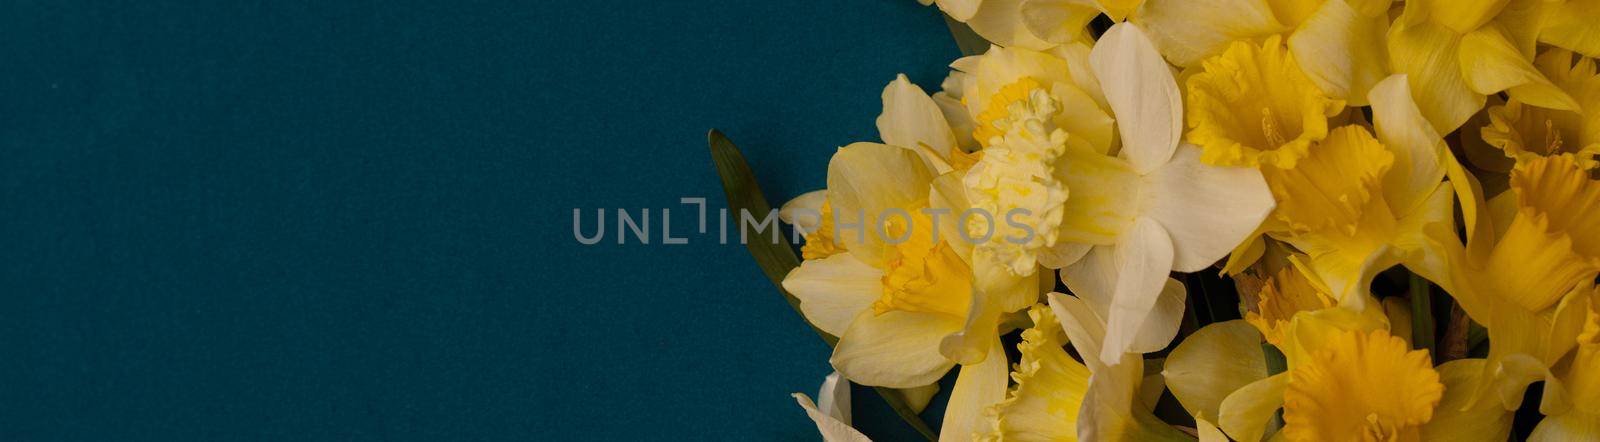 Romantic banner, delicate yellow daffodils flowers close-up. Full size. сopi spaceI, ndigo background by Matiunina